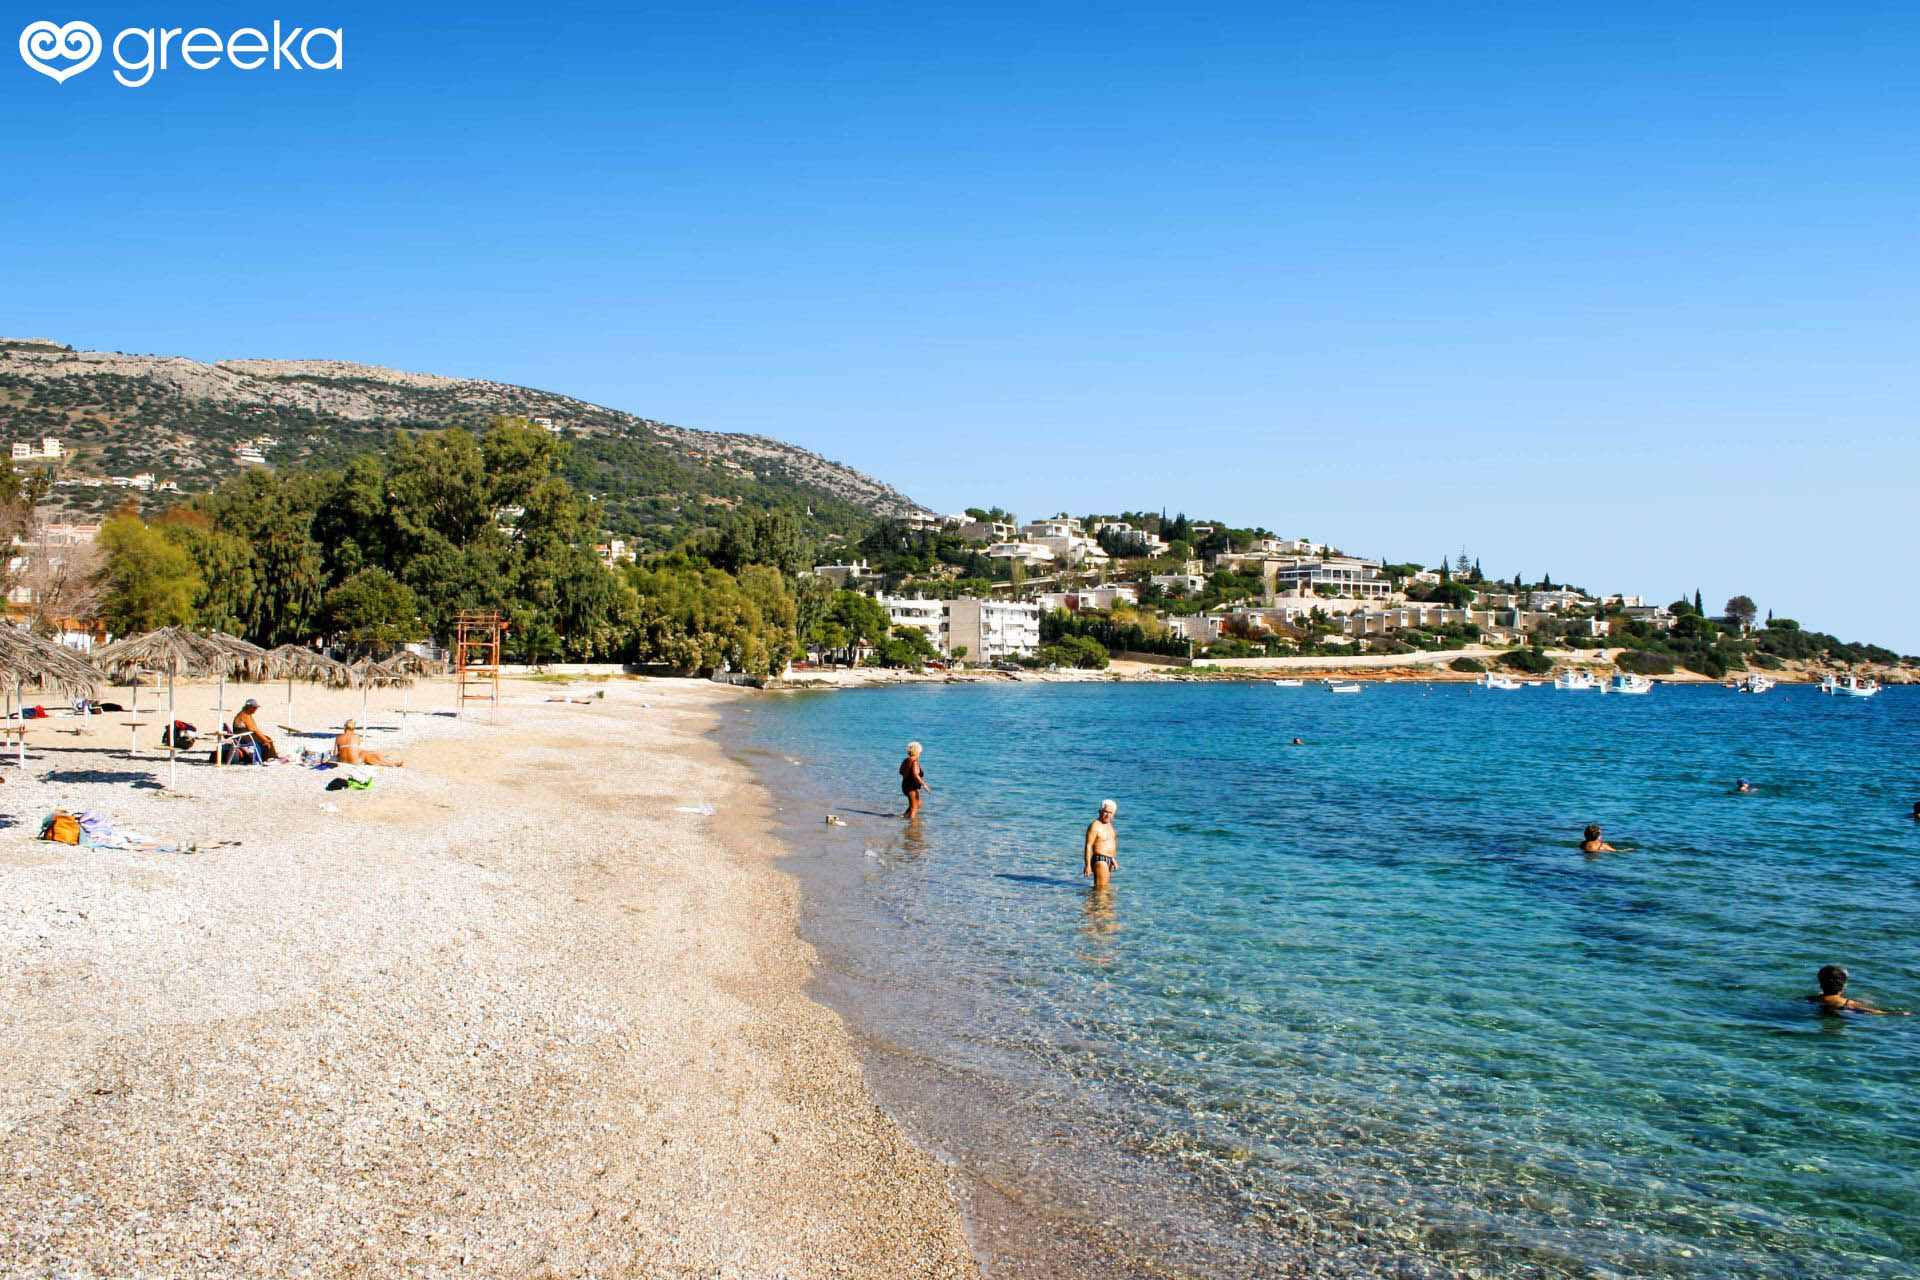 beaches to visit in athens greece